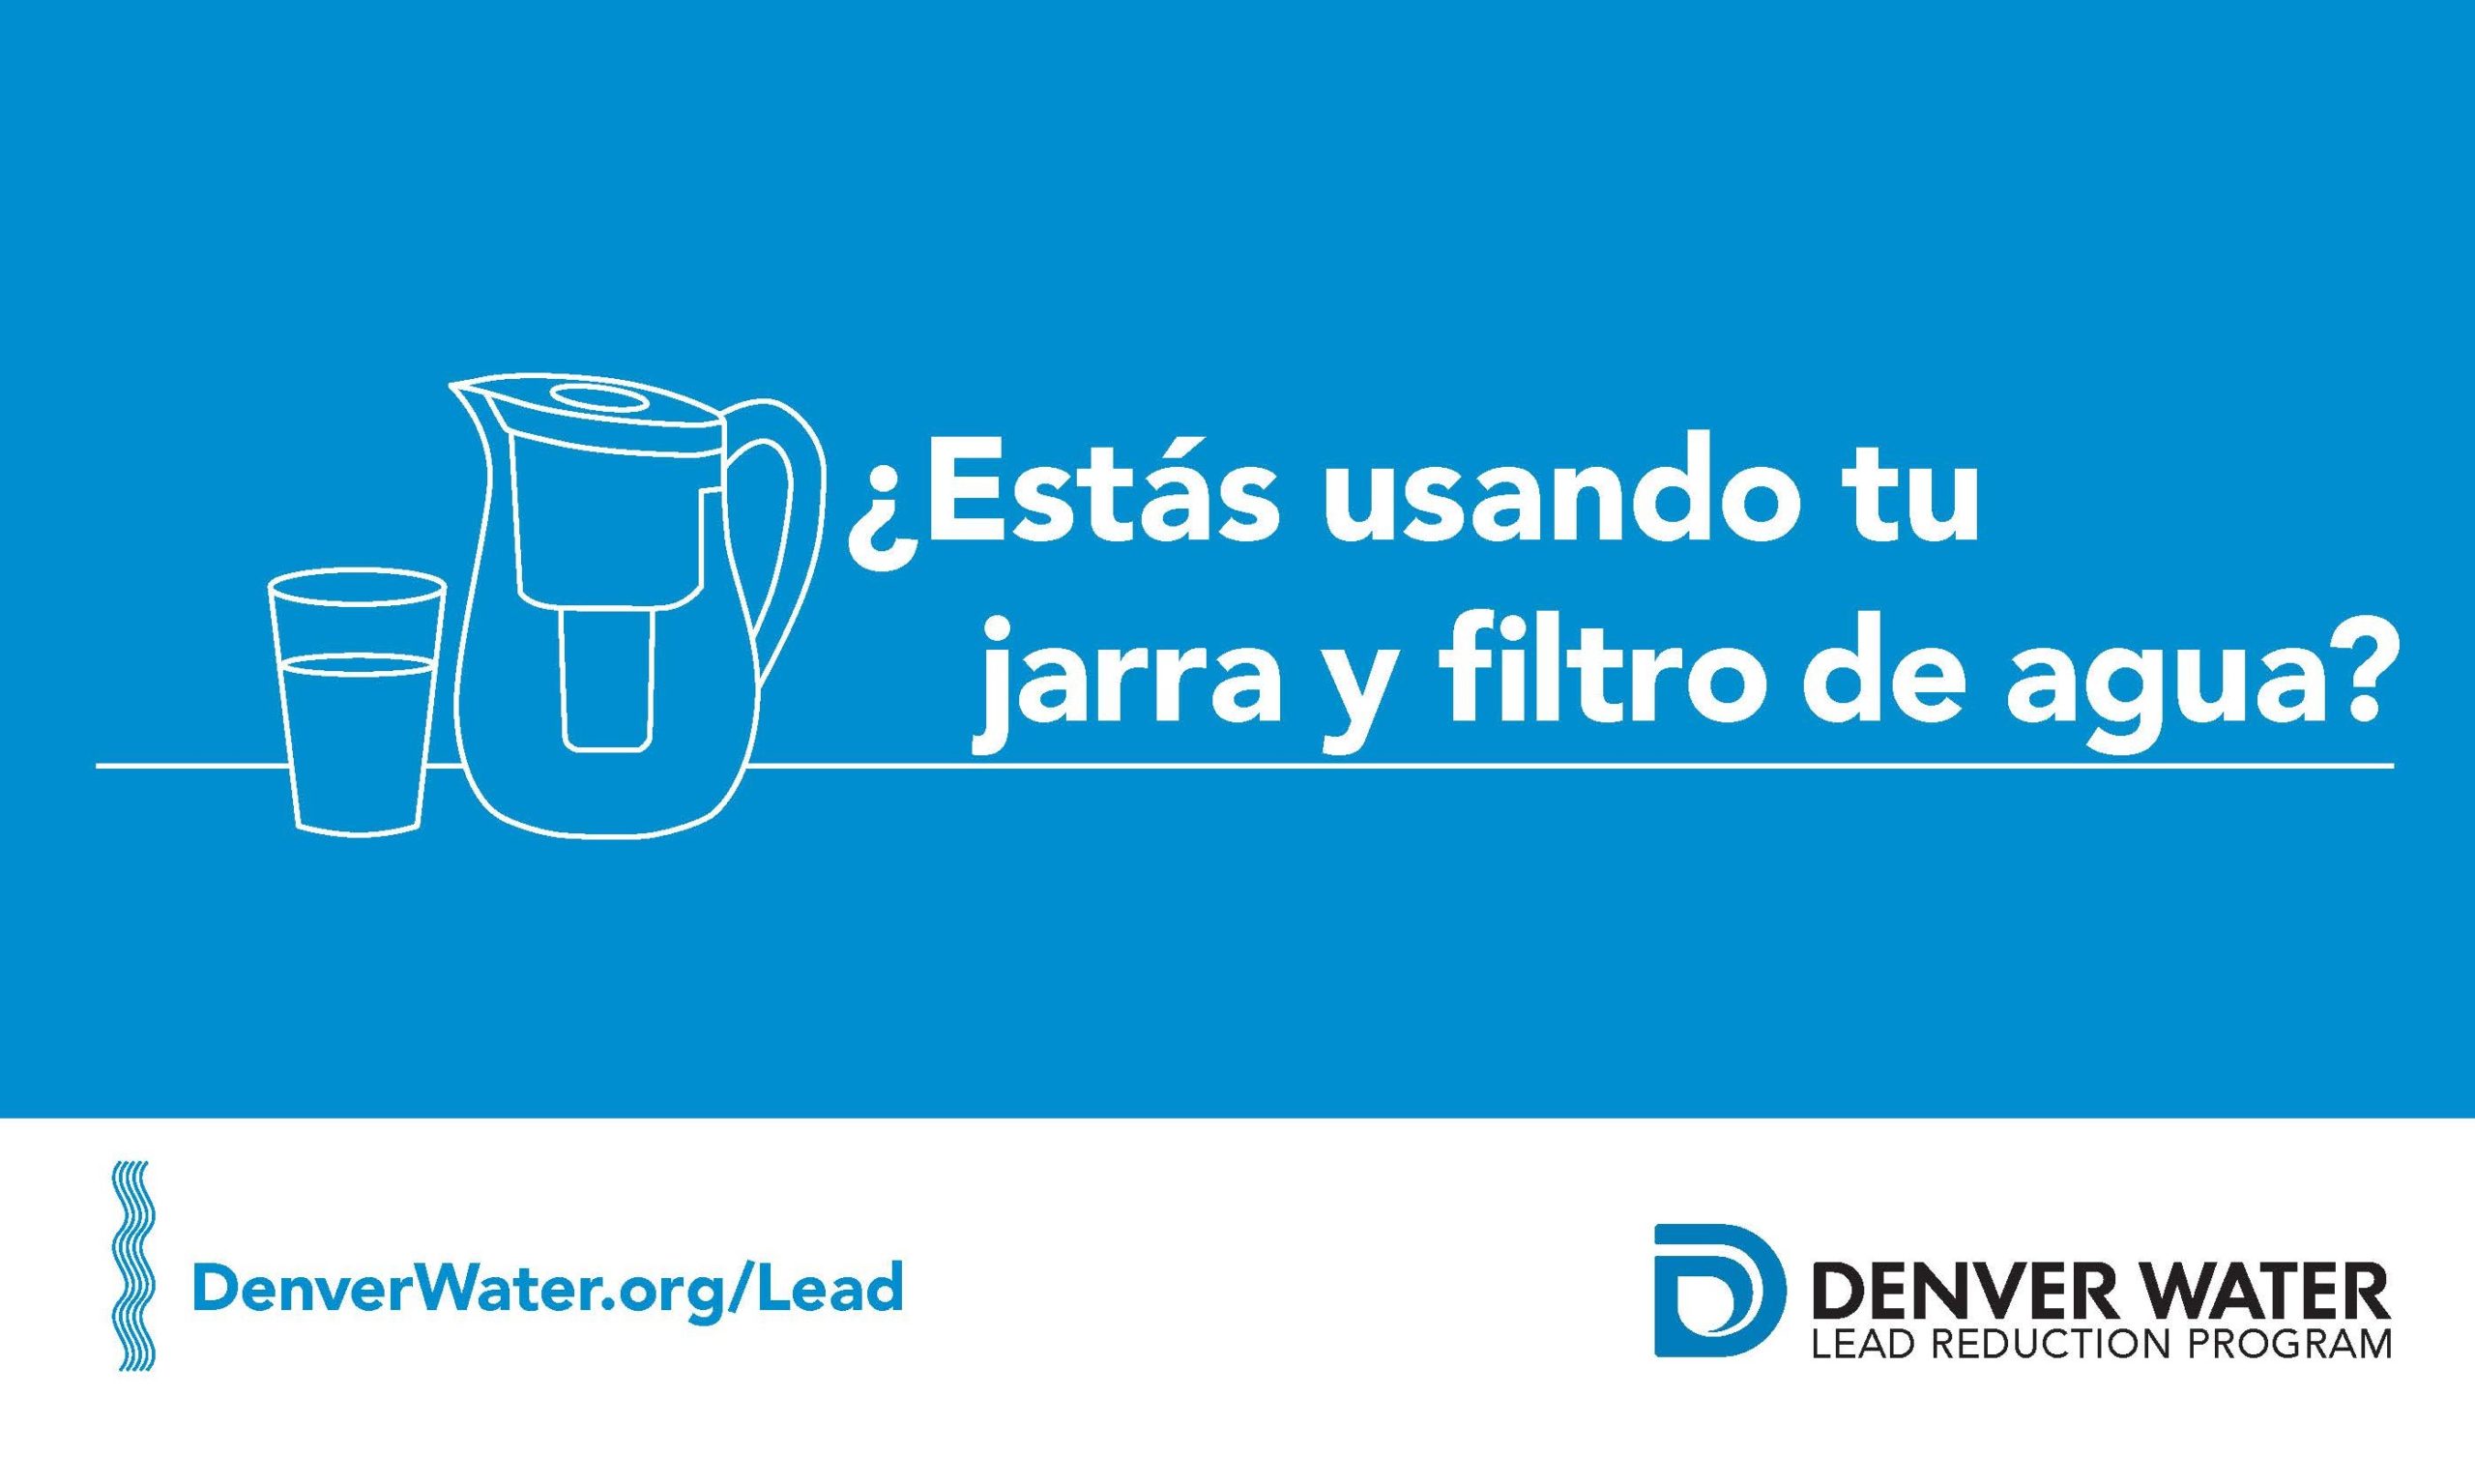 Denver Water is developing content in Spanish and English to reach 95% of customers in its Lead Reduction Program. Image credit: Denver Water.